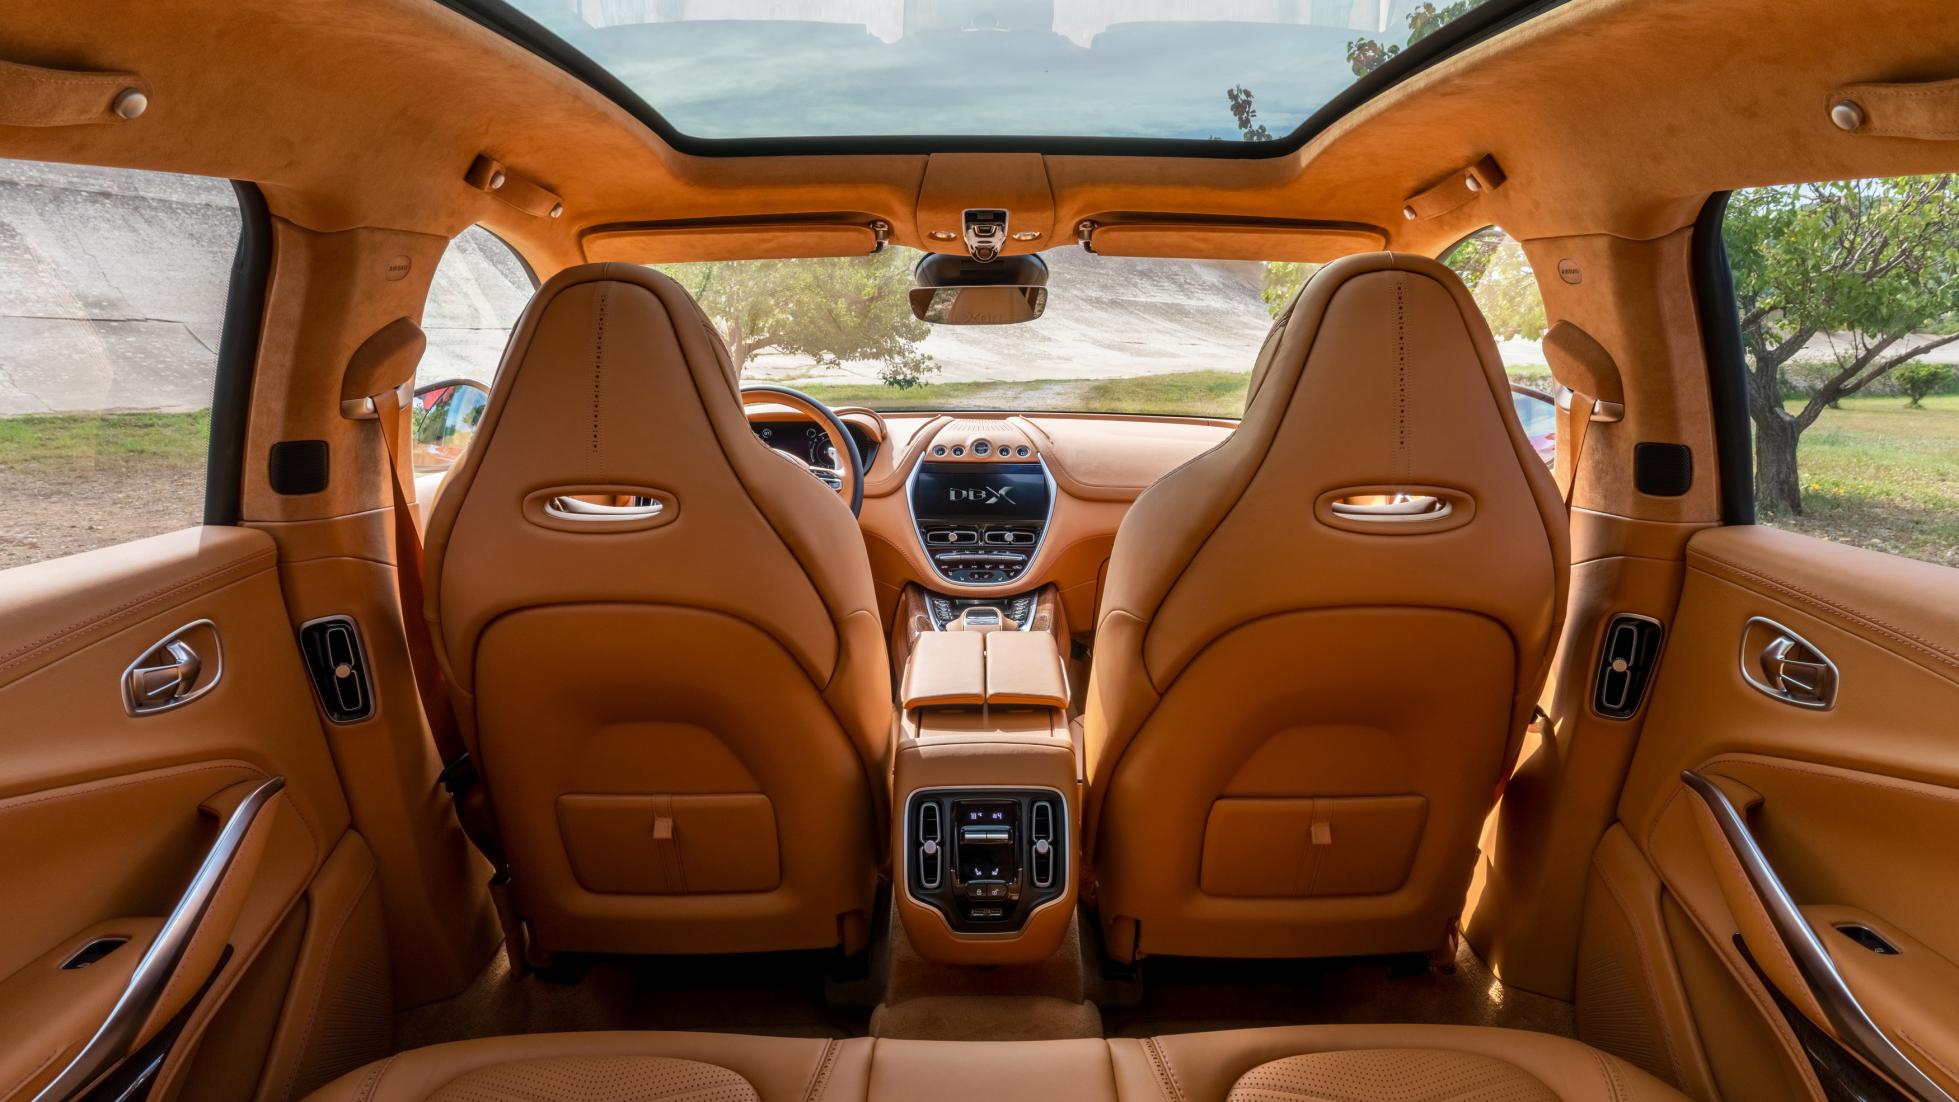 Here, have a sit inside the Aston Martin DBX SUV